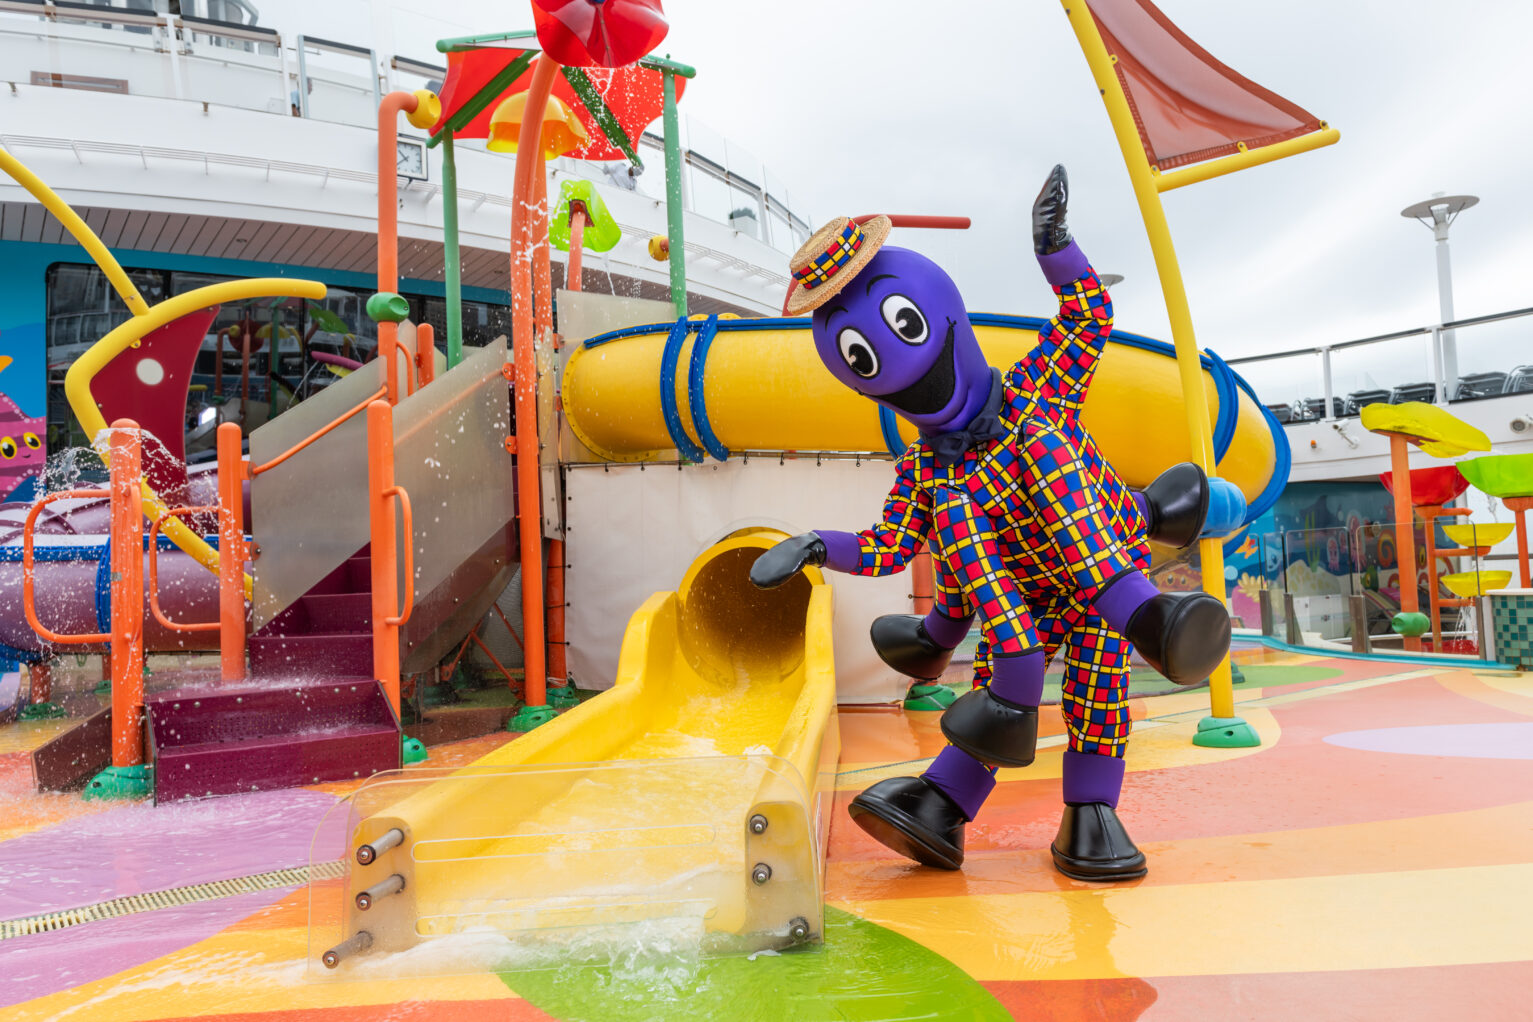 The Wiggles and The Wiggly Friends aboard Ovation of the Seas